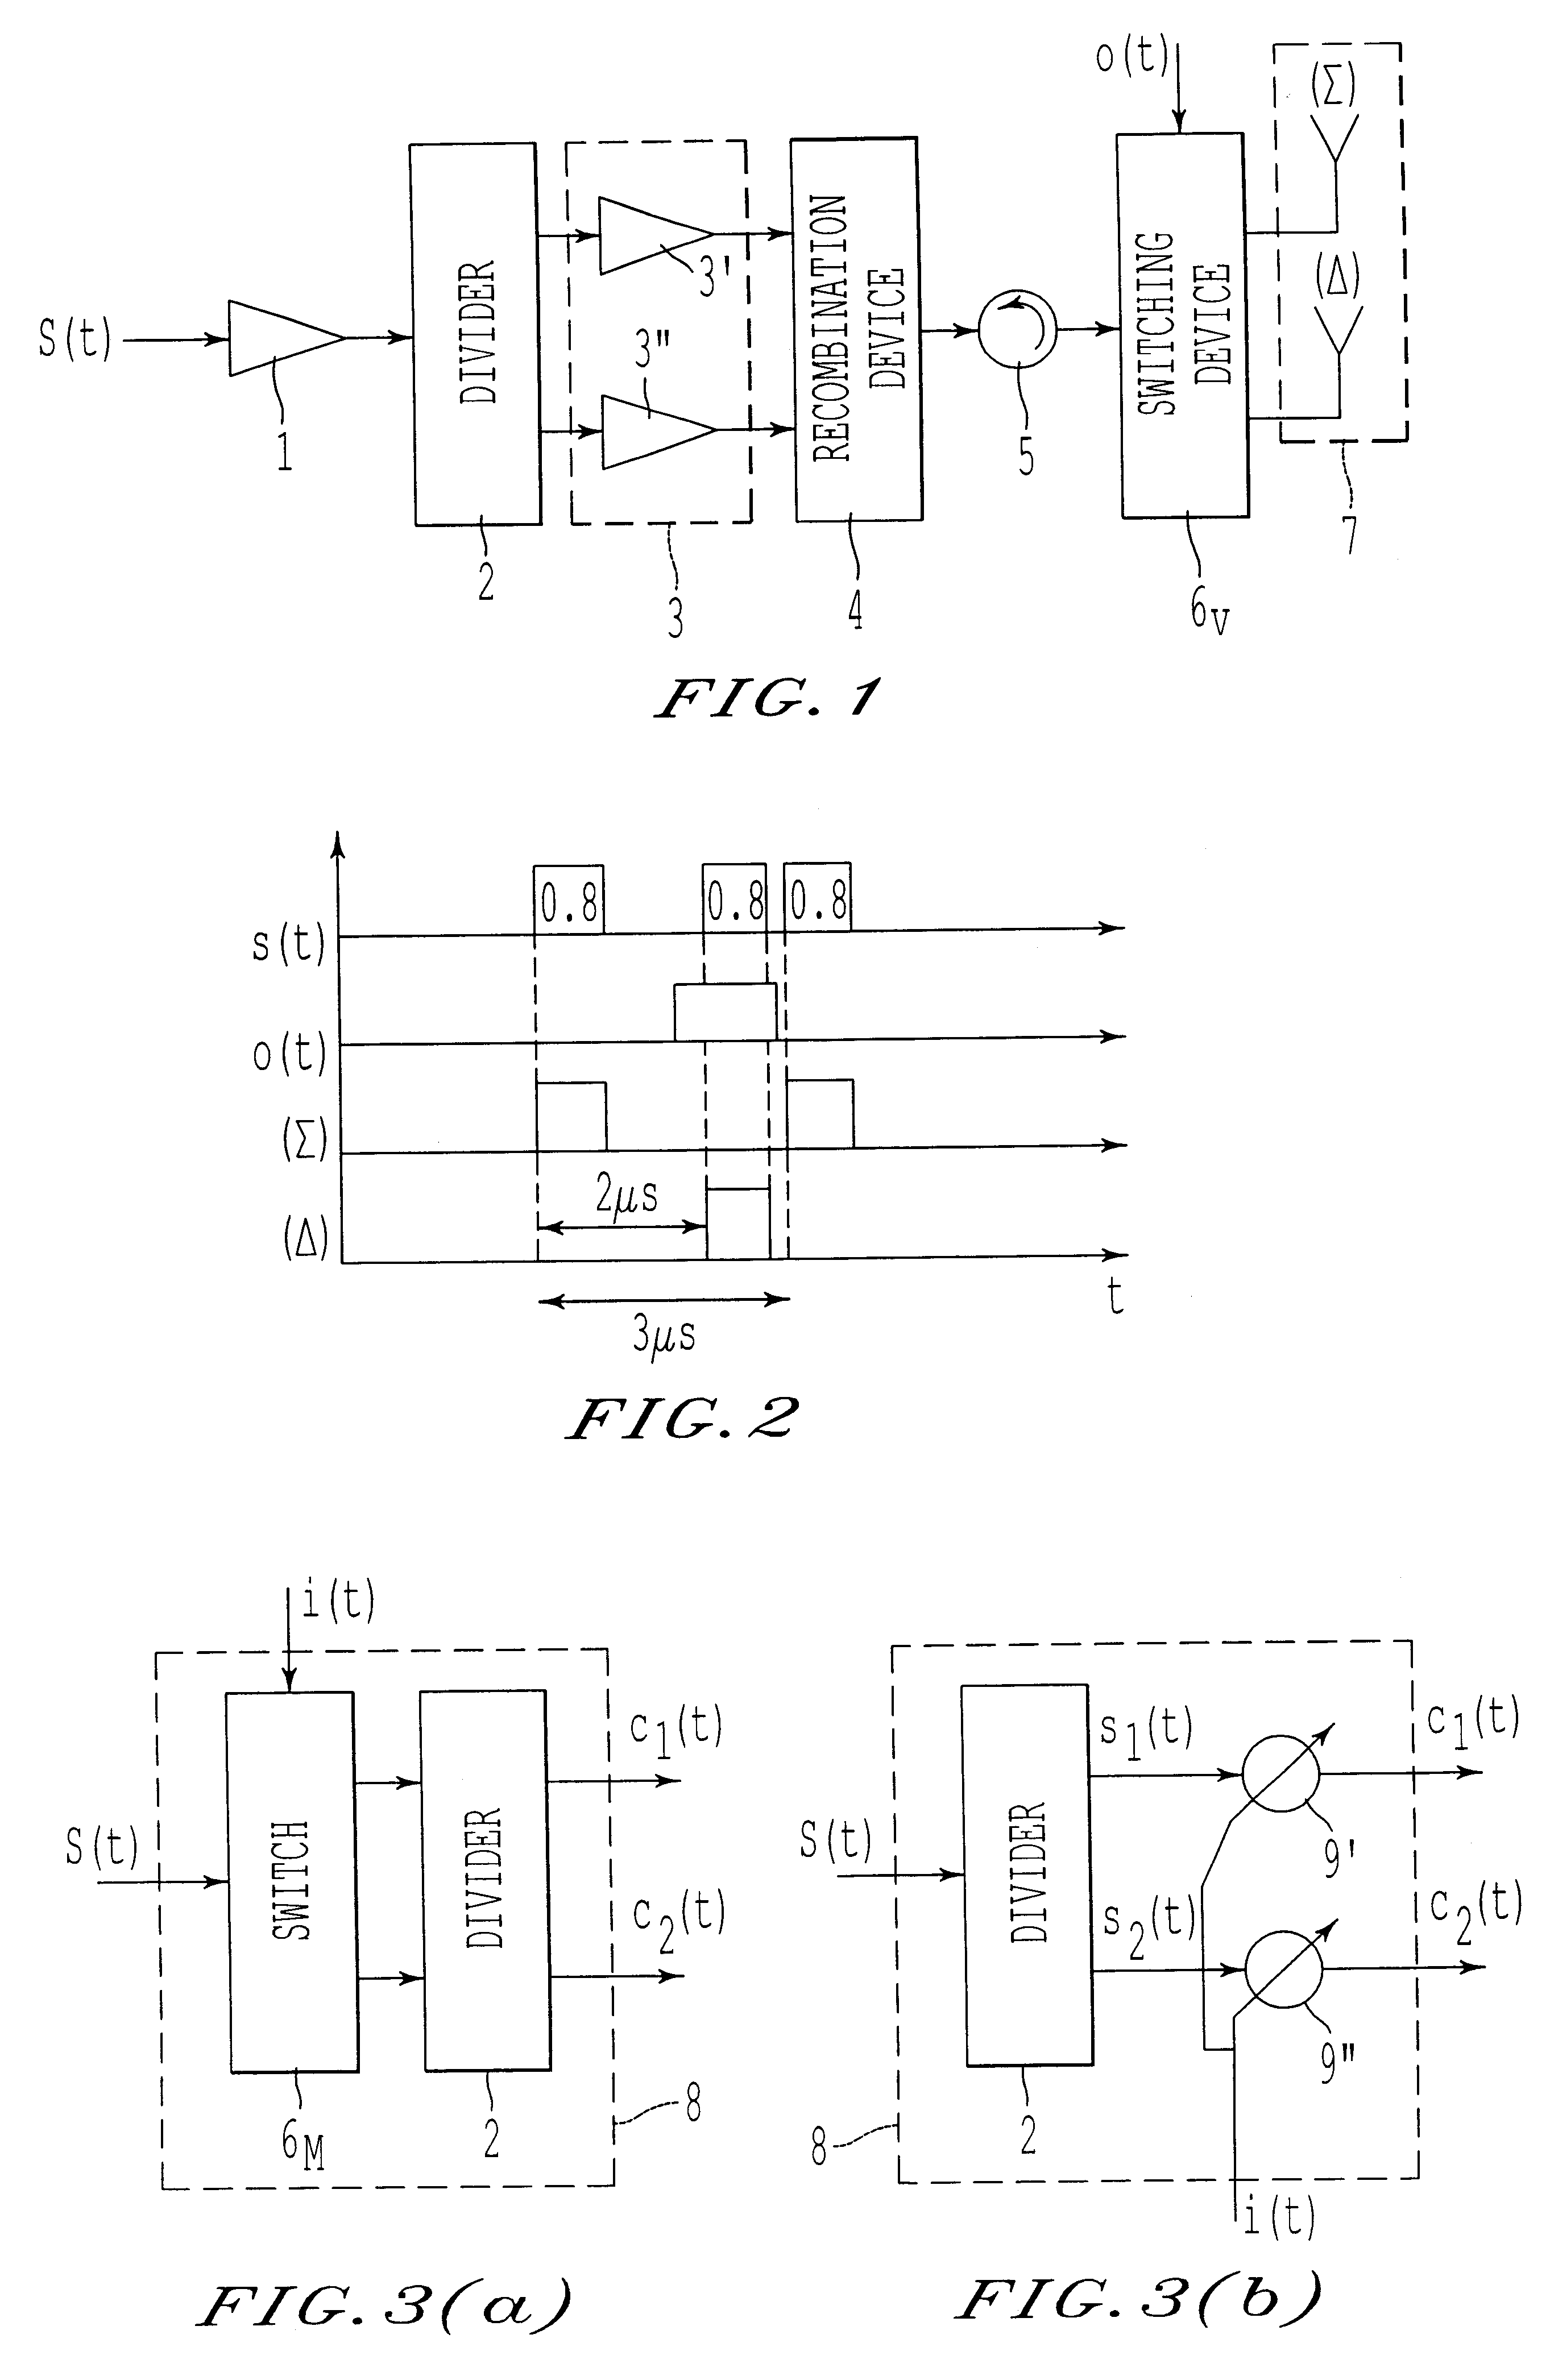 Method and device for the encoding and decoding of power distribution at the outputs of a system